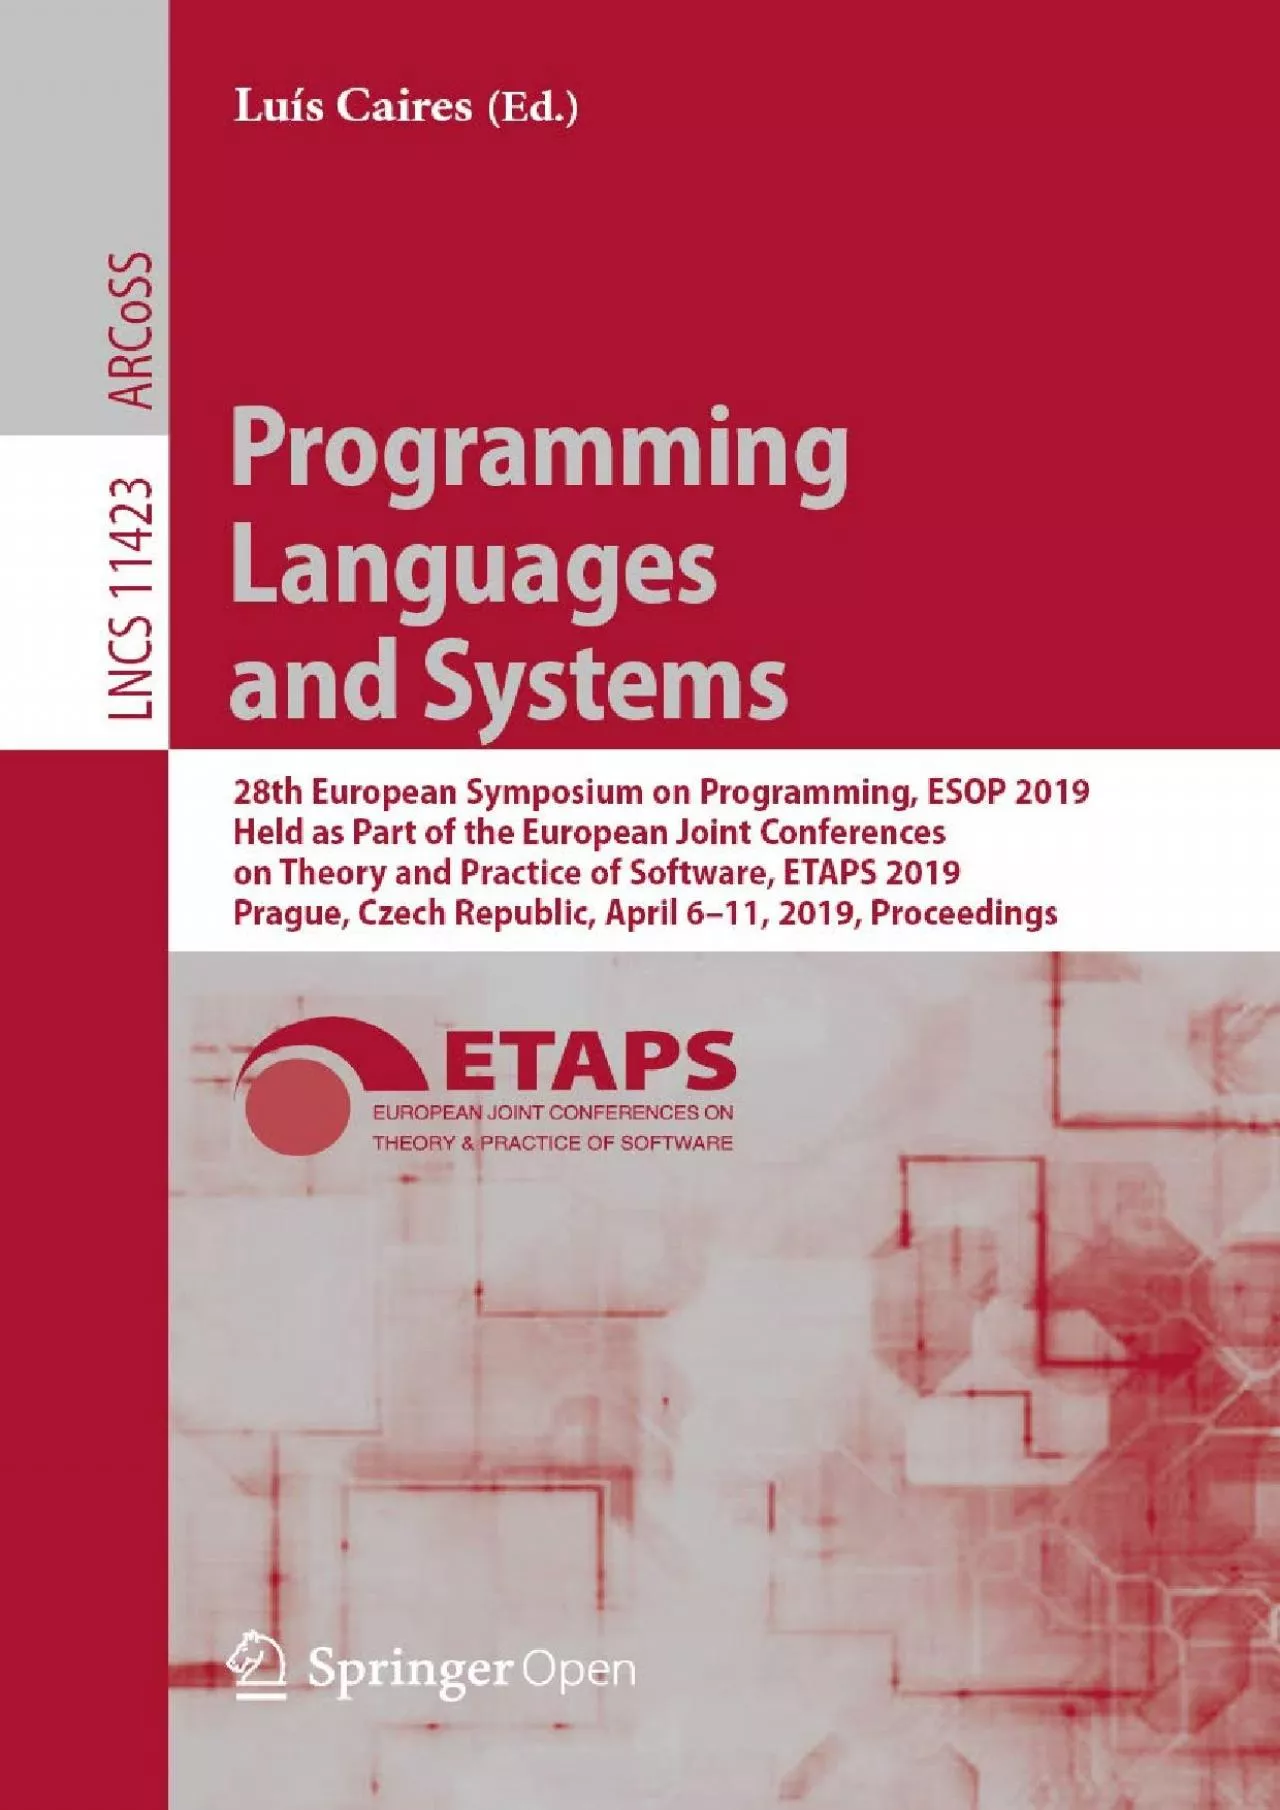 [READING BOOK]-Programming Languages and Systems: 28th European Symposium on Programming,